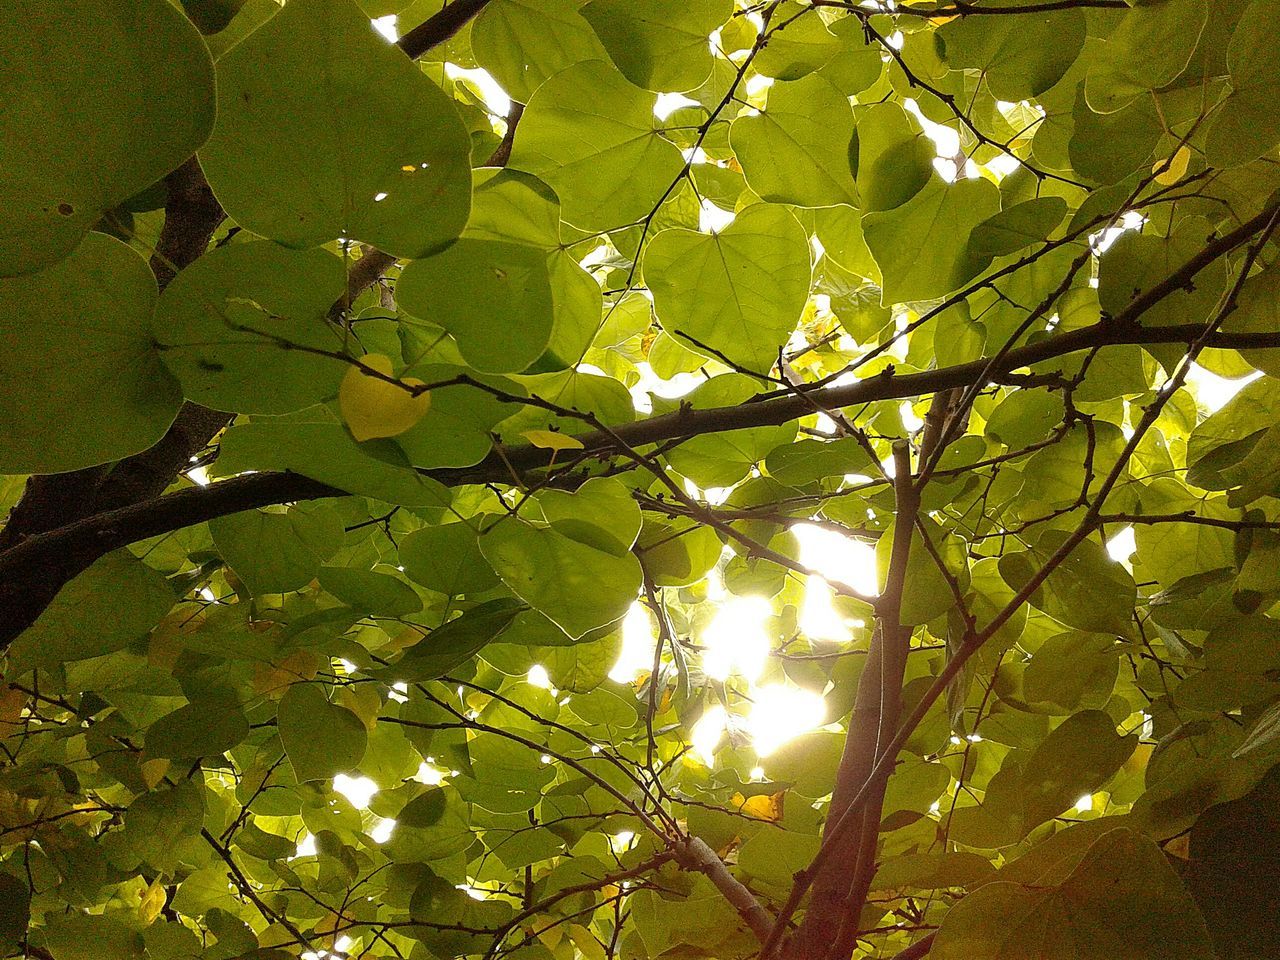 growth, sunlight, nature, tree, branch, leaf, no people, low angle view, day, outdoors, beauty in nature, freshness, close-up